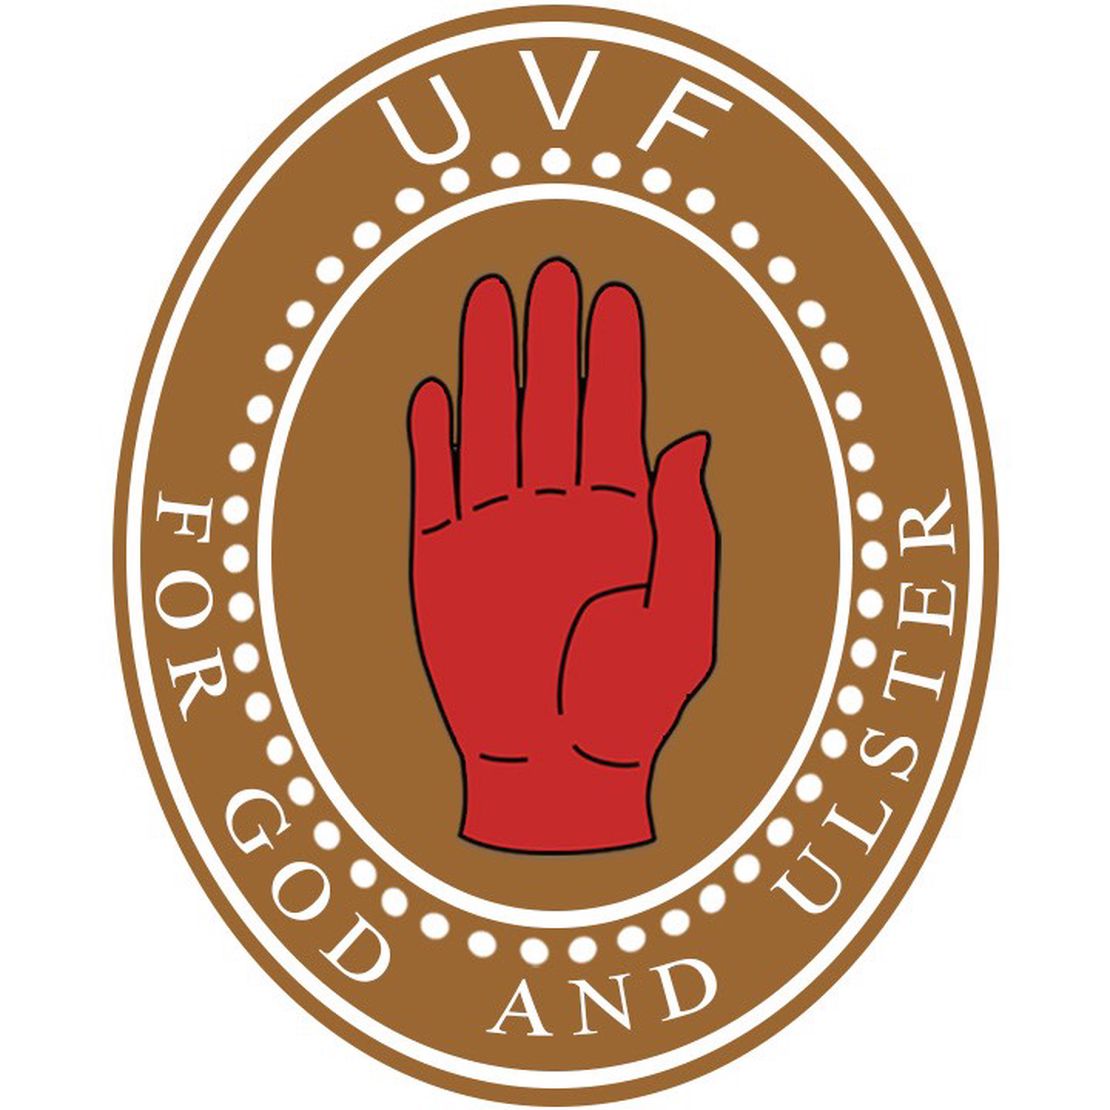 The Ulster Volunteer Force is founded by the Unionist Council